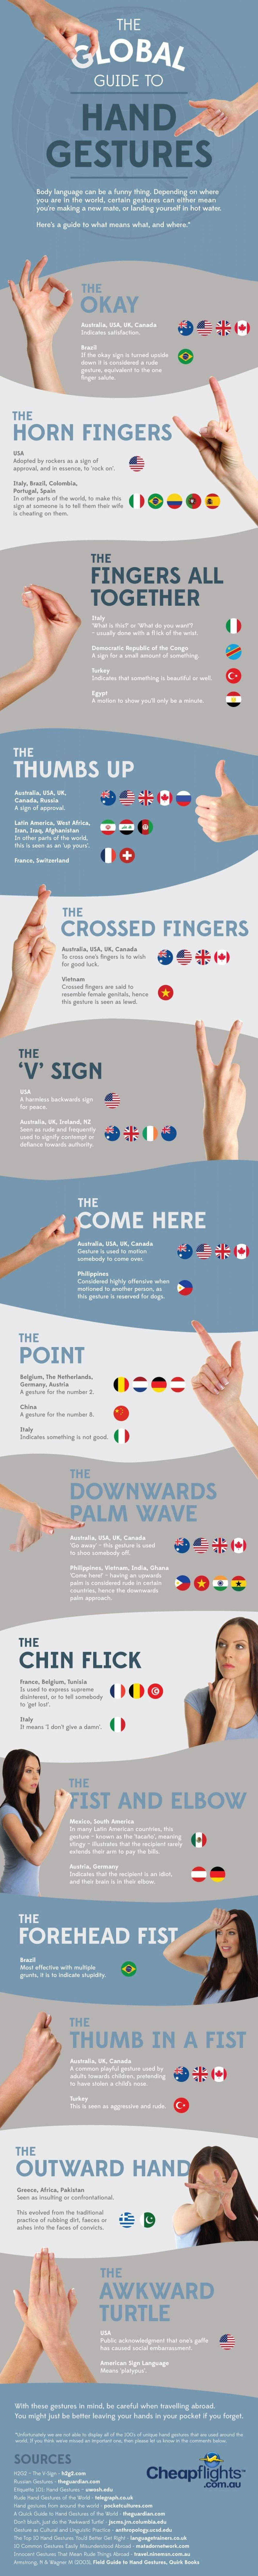 The Global Guide To Hand Gestures